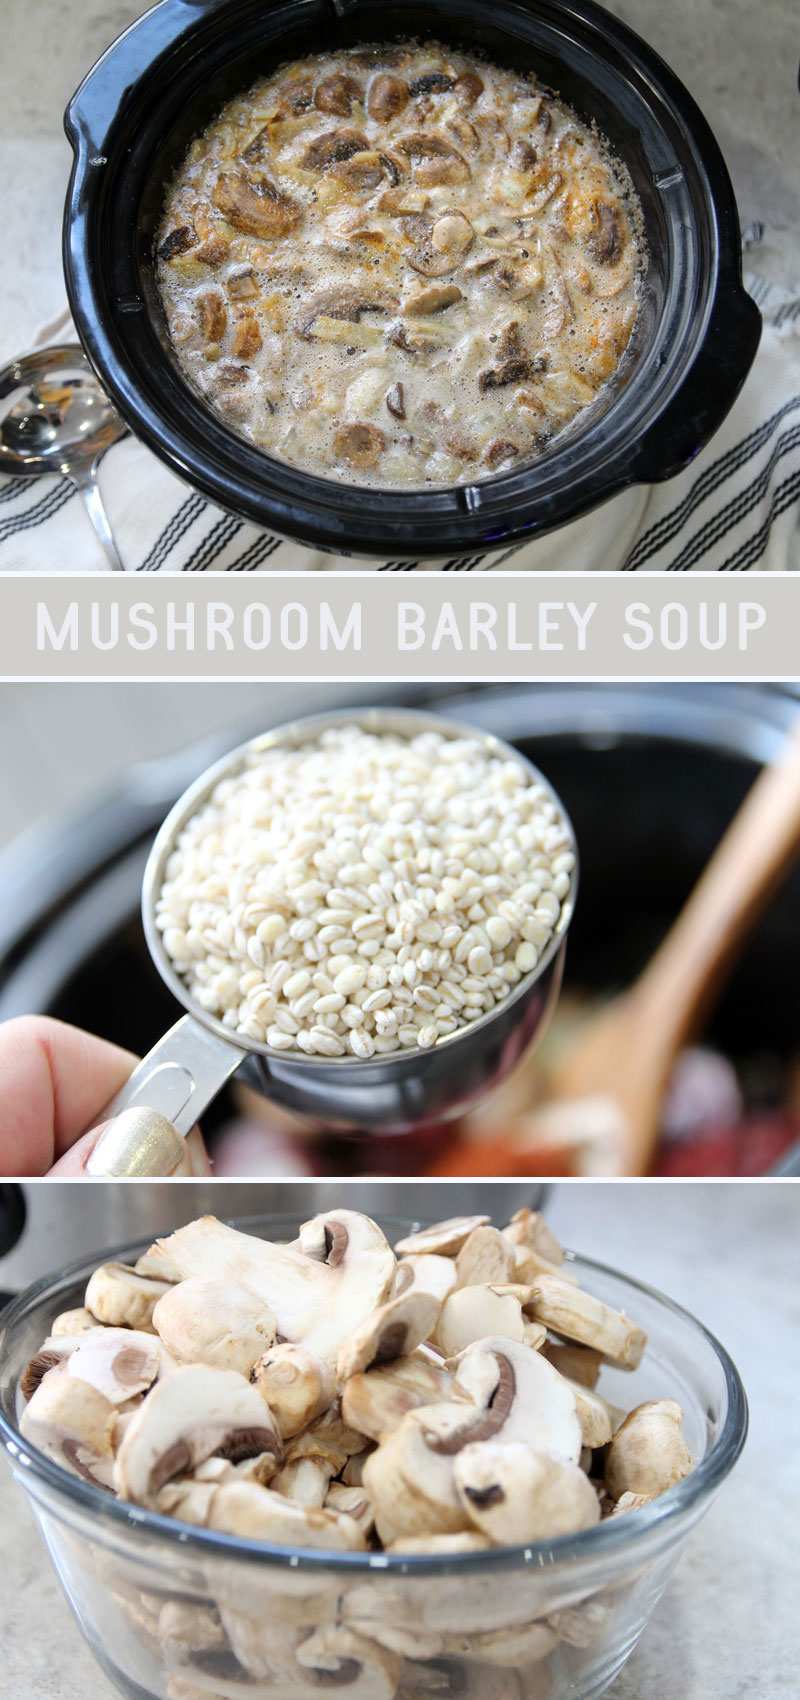 Slow cooker soups make great dinner - and this beef and grain soup is a savory delight! Make this Jewish crock pot mushroom barley soup in the slow cooker and cook overnight for an easy one dish dinner and everyday meal.